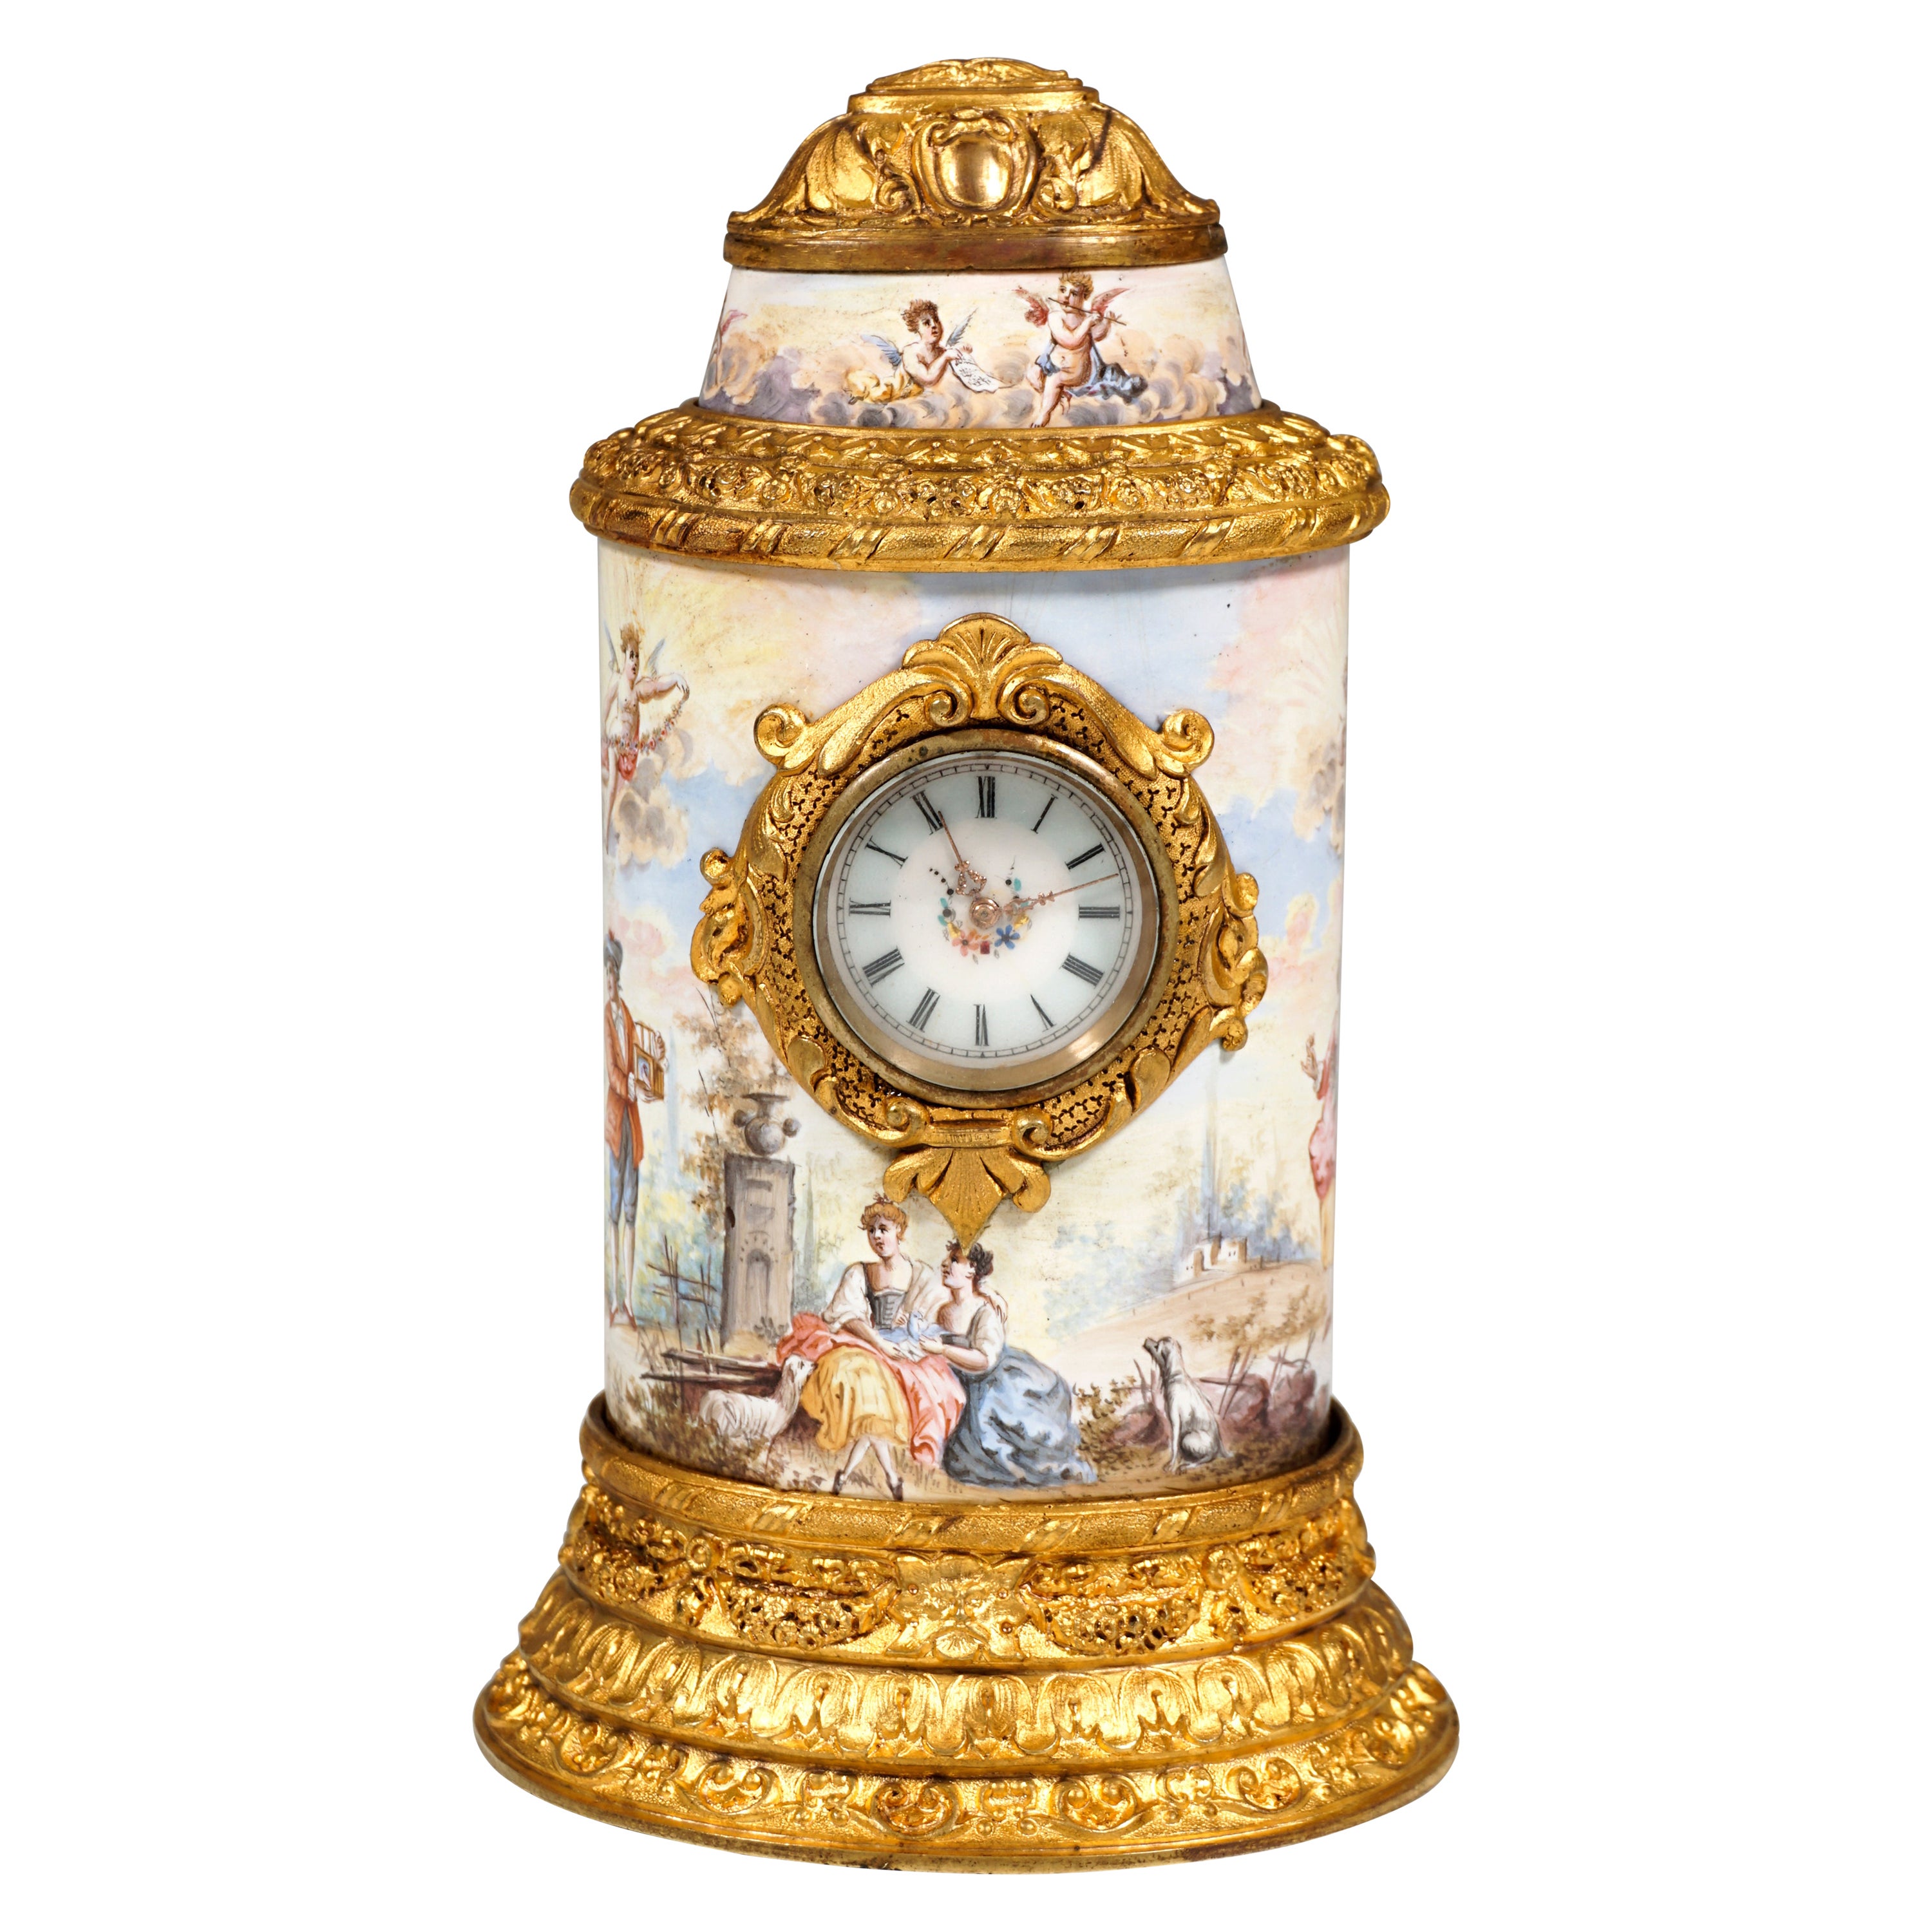 19th Century Viennese Enamel Table Clock with Fire-Gilding and Watteau Painting